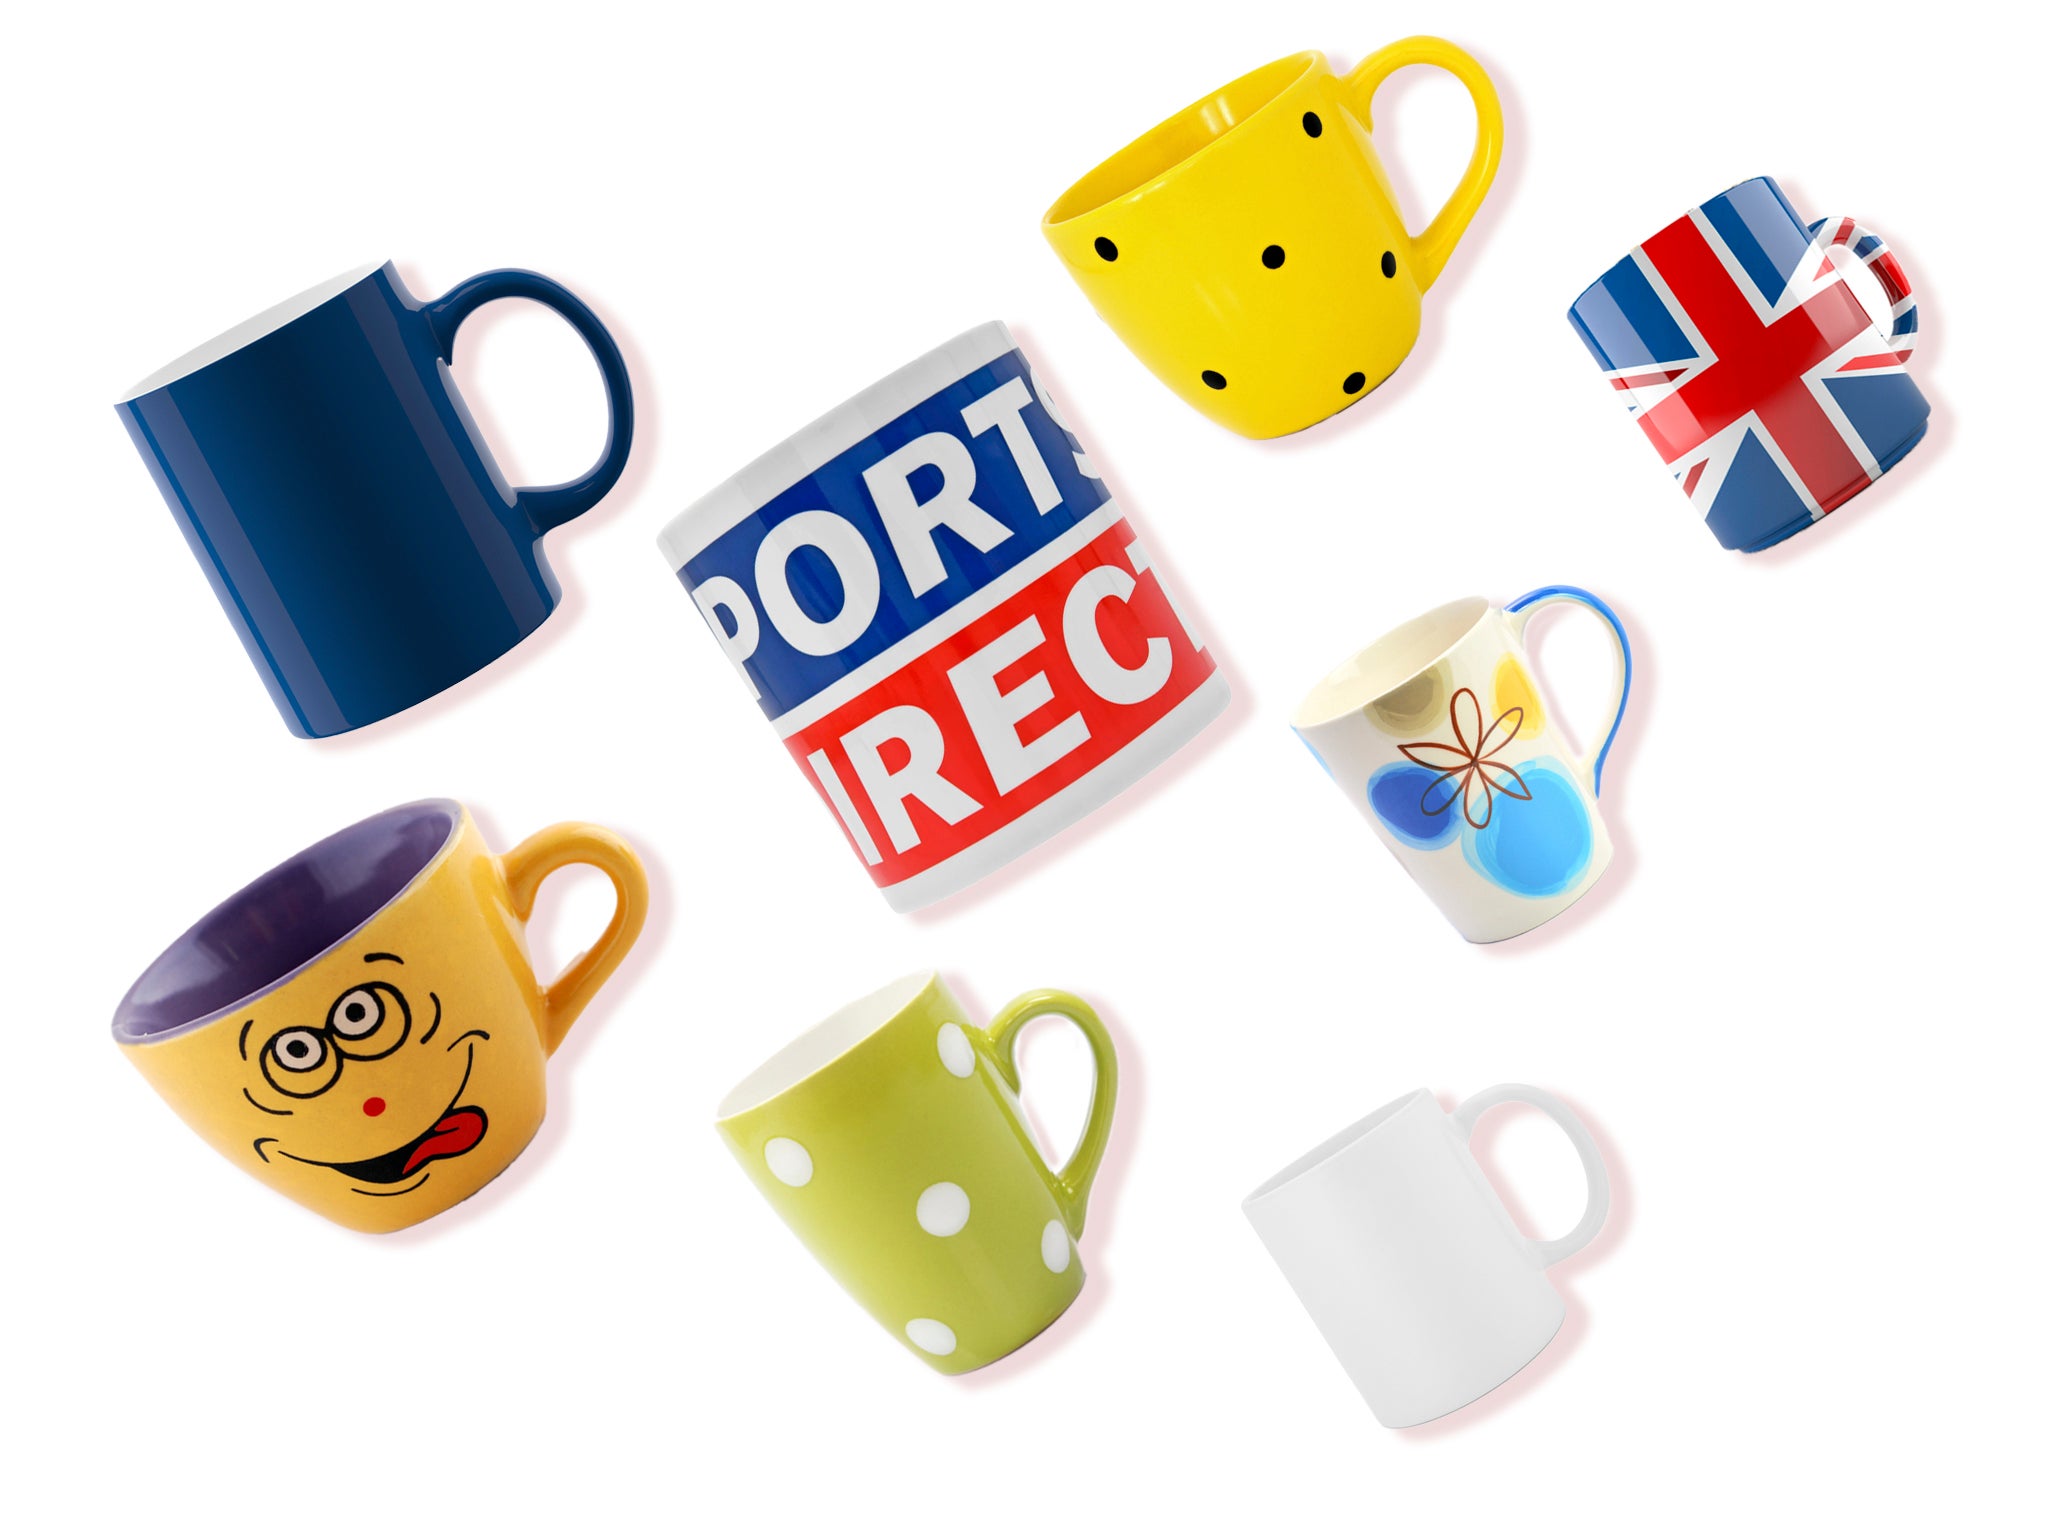 You mug! Bone china or ceramic? Fluted lip or straight? Round or square? These are decisions that divide a nation